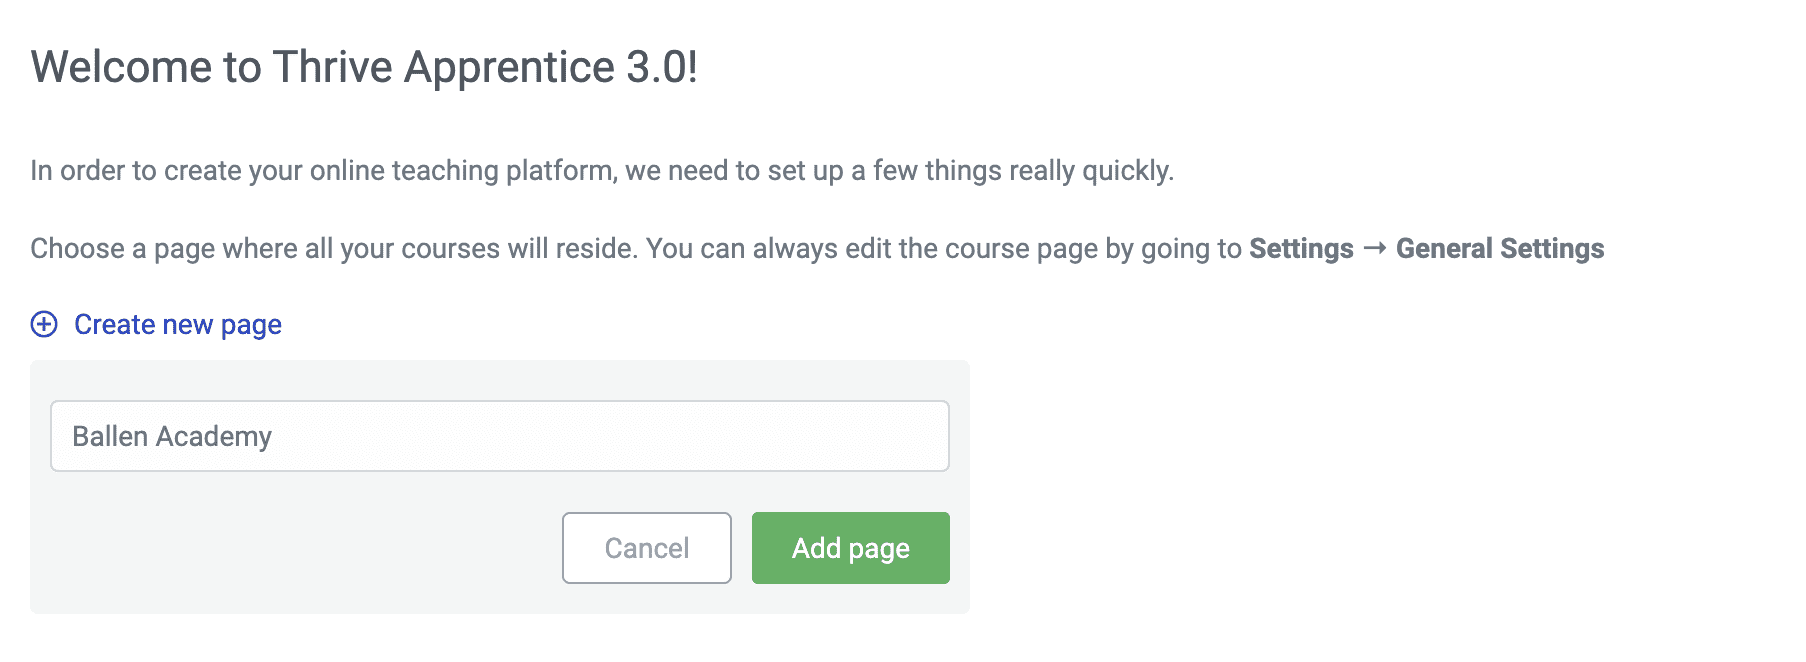 Welcome to Thrive Apprentice 3.0!
In order to create your online teaching platform, we need to set up a few things really quickly.

Choose a page where all your courses will reside. You can always edit the course page by going to Settings → General Settings